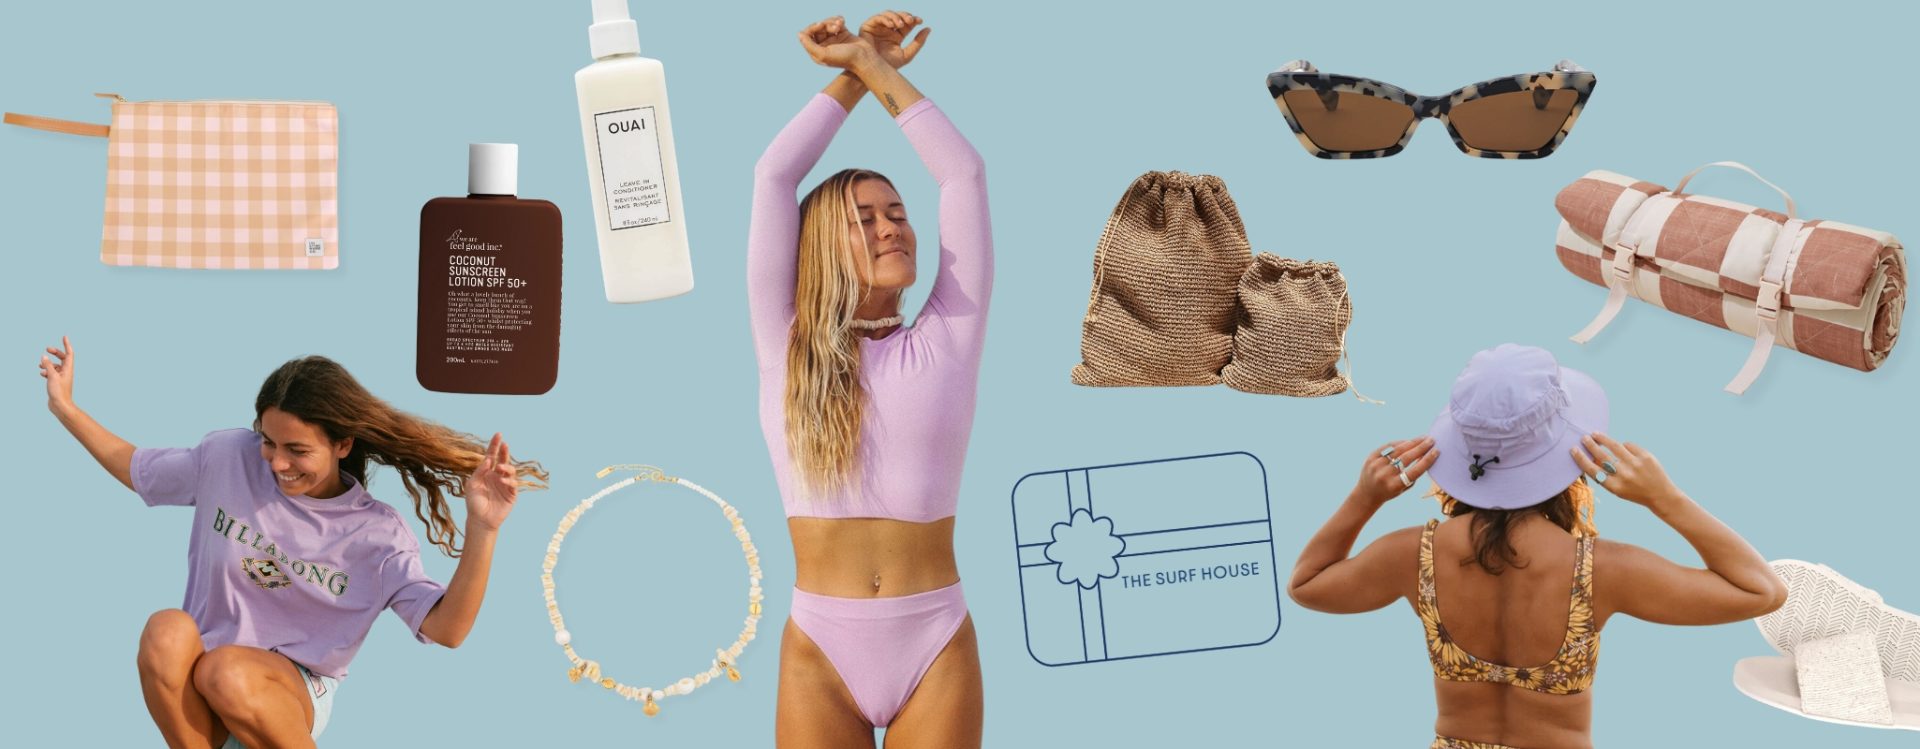 2023 Christmas Gift Guide for Her: Beach lovers, surfers, travellers